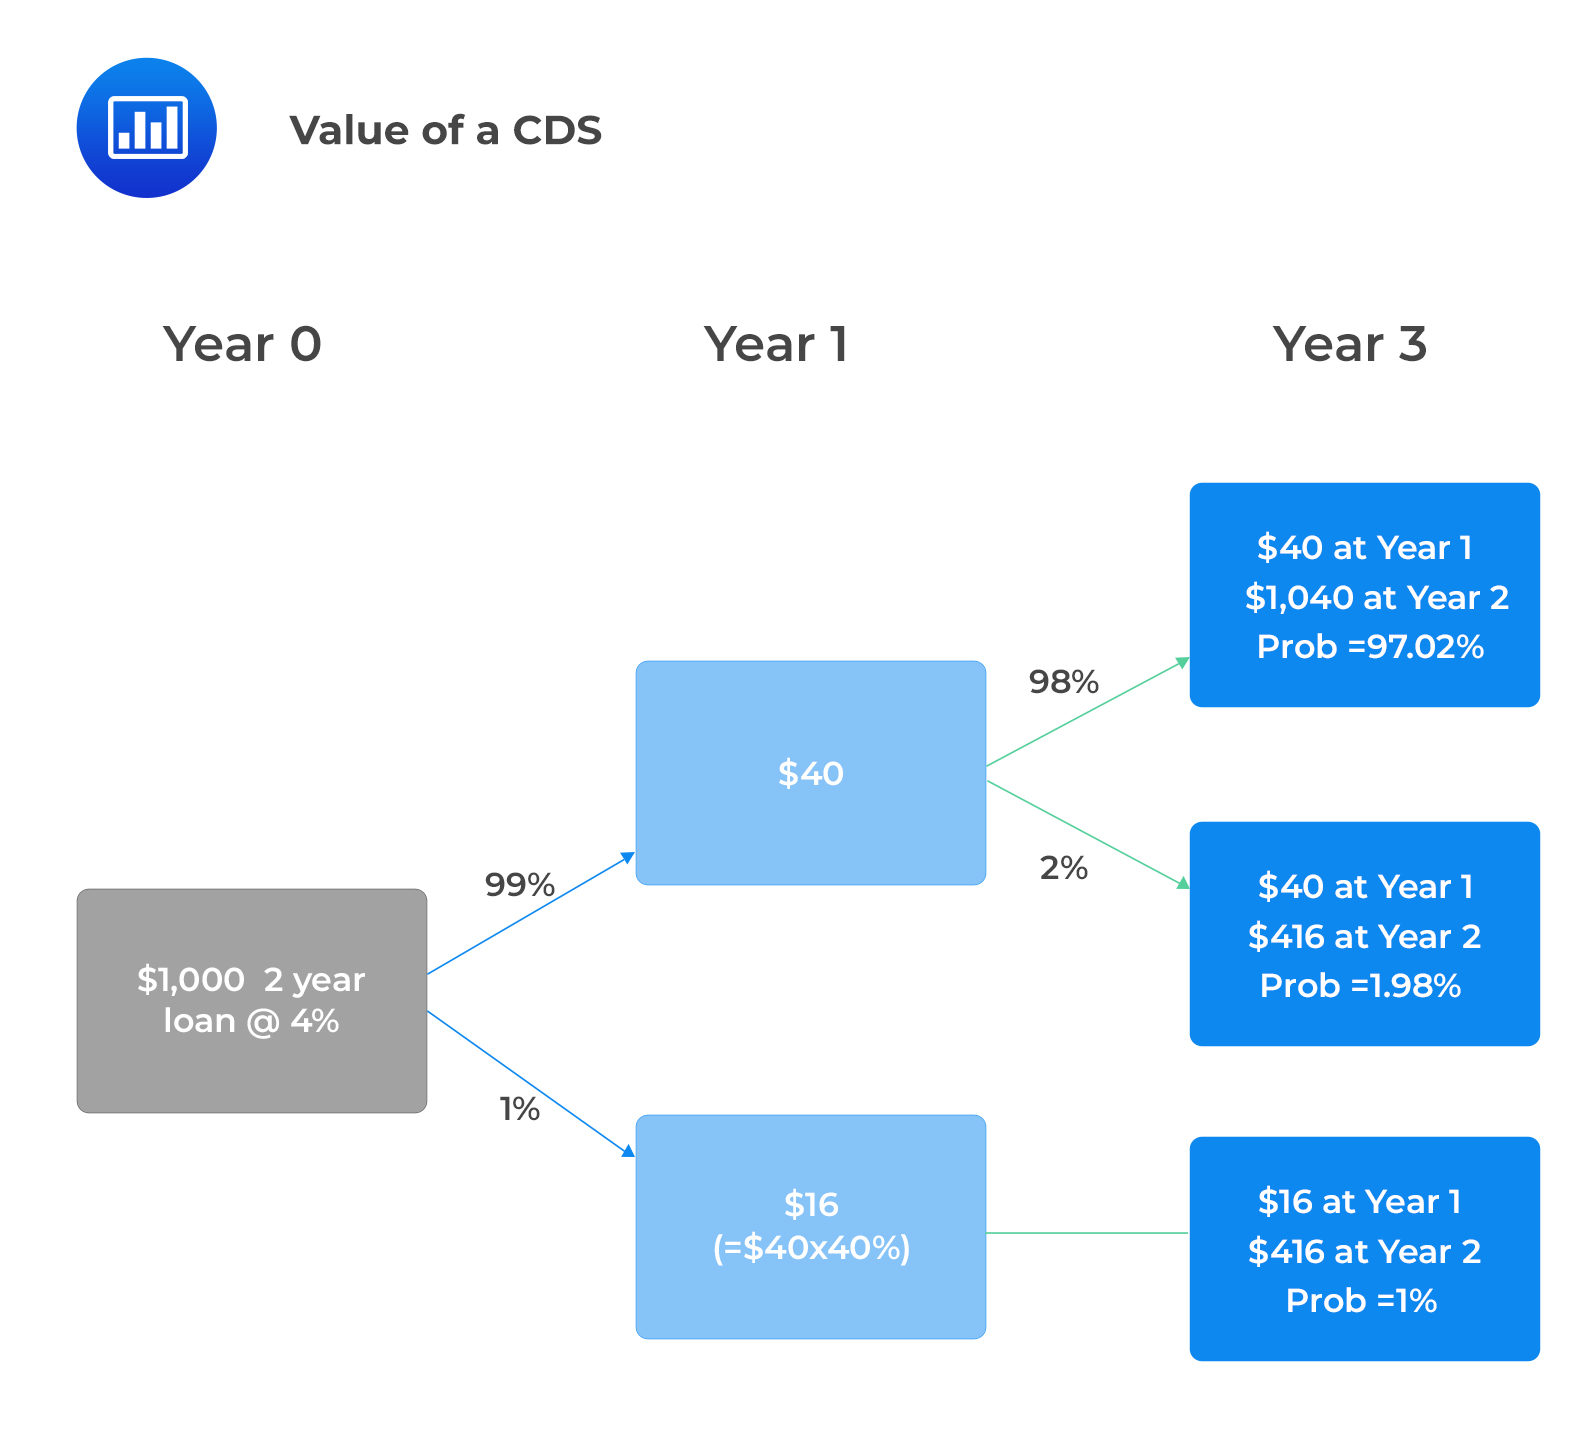 Value of a CDS